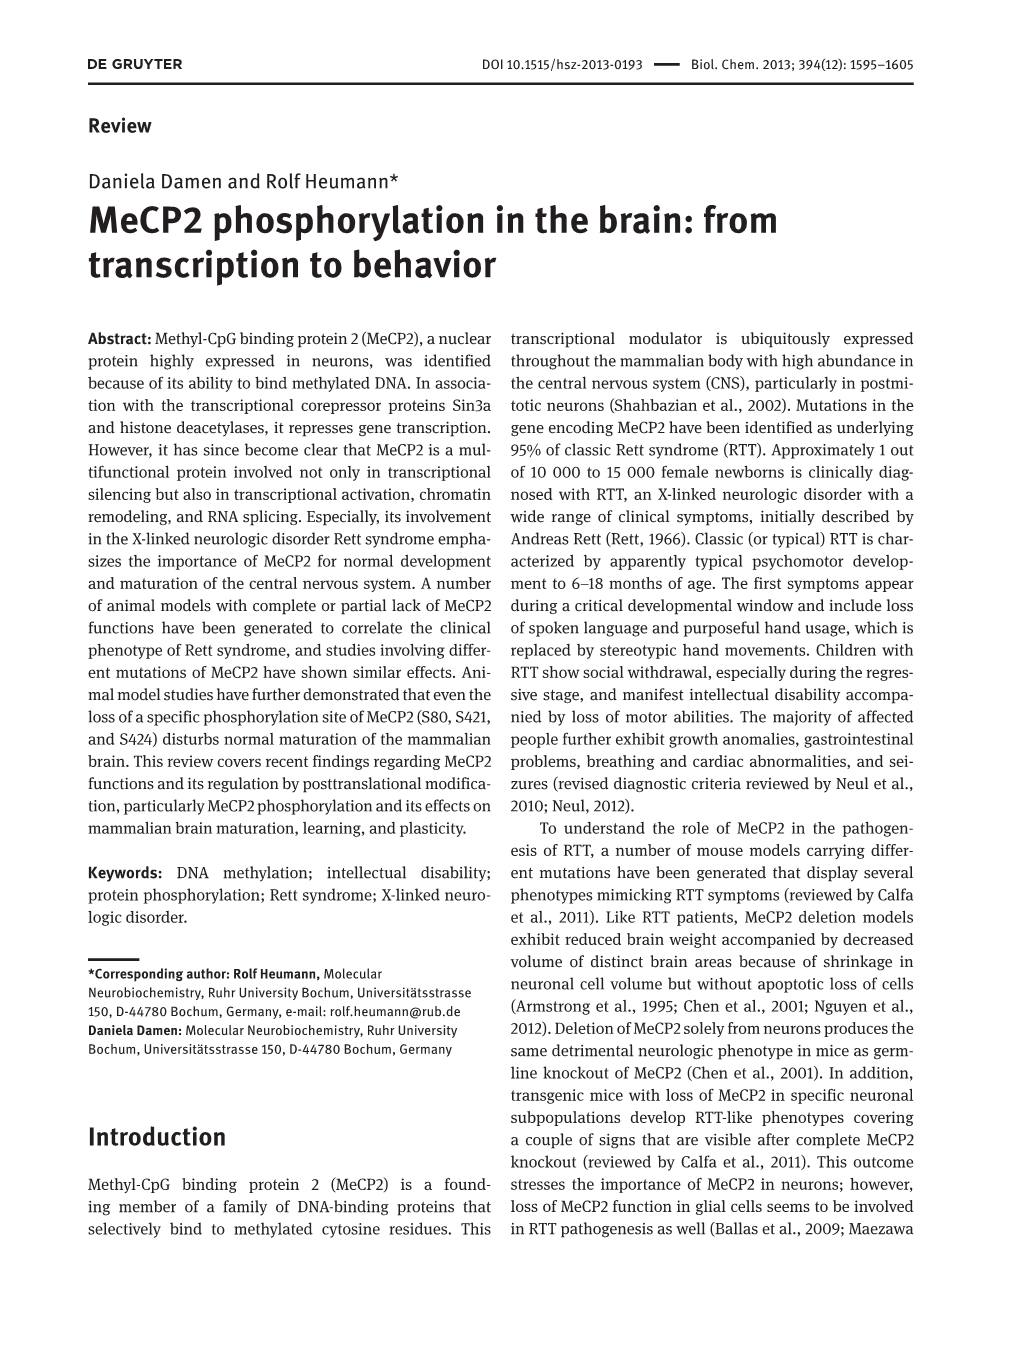 Mecp2 Phosphorylation in the Brain: from Transcription to Behavior